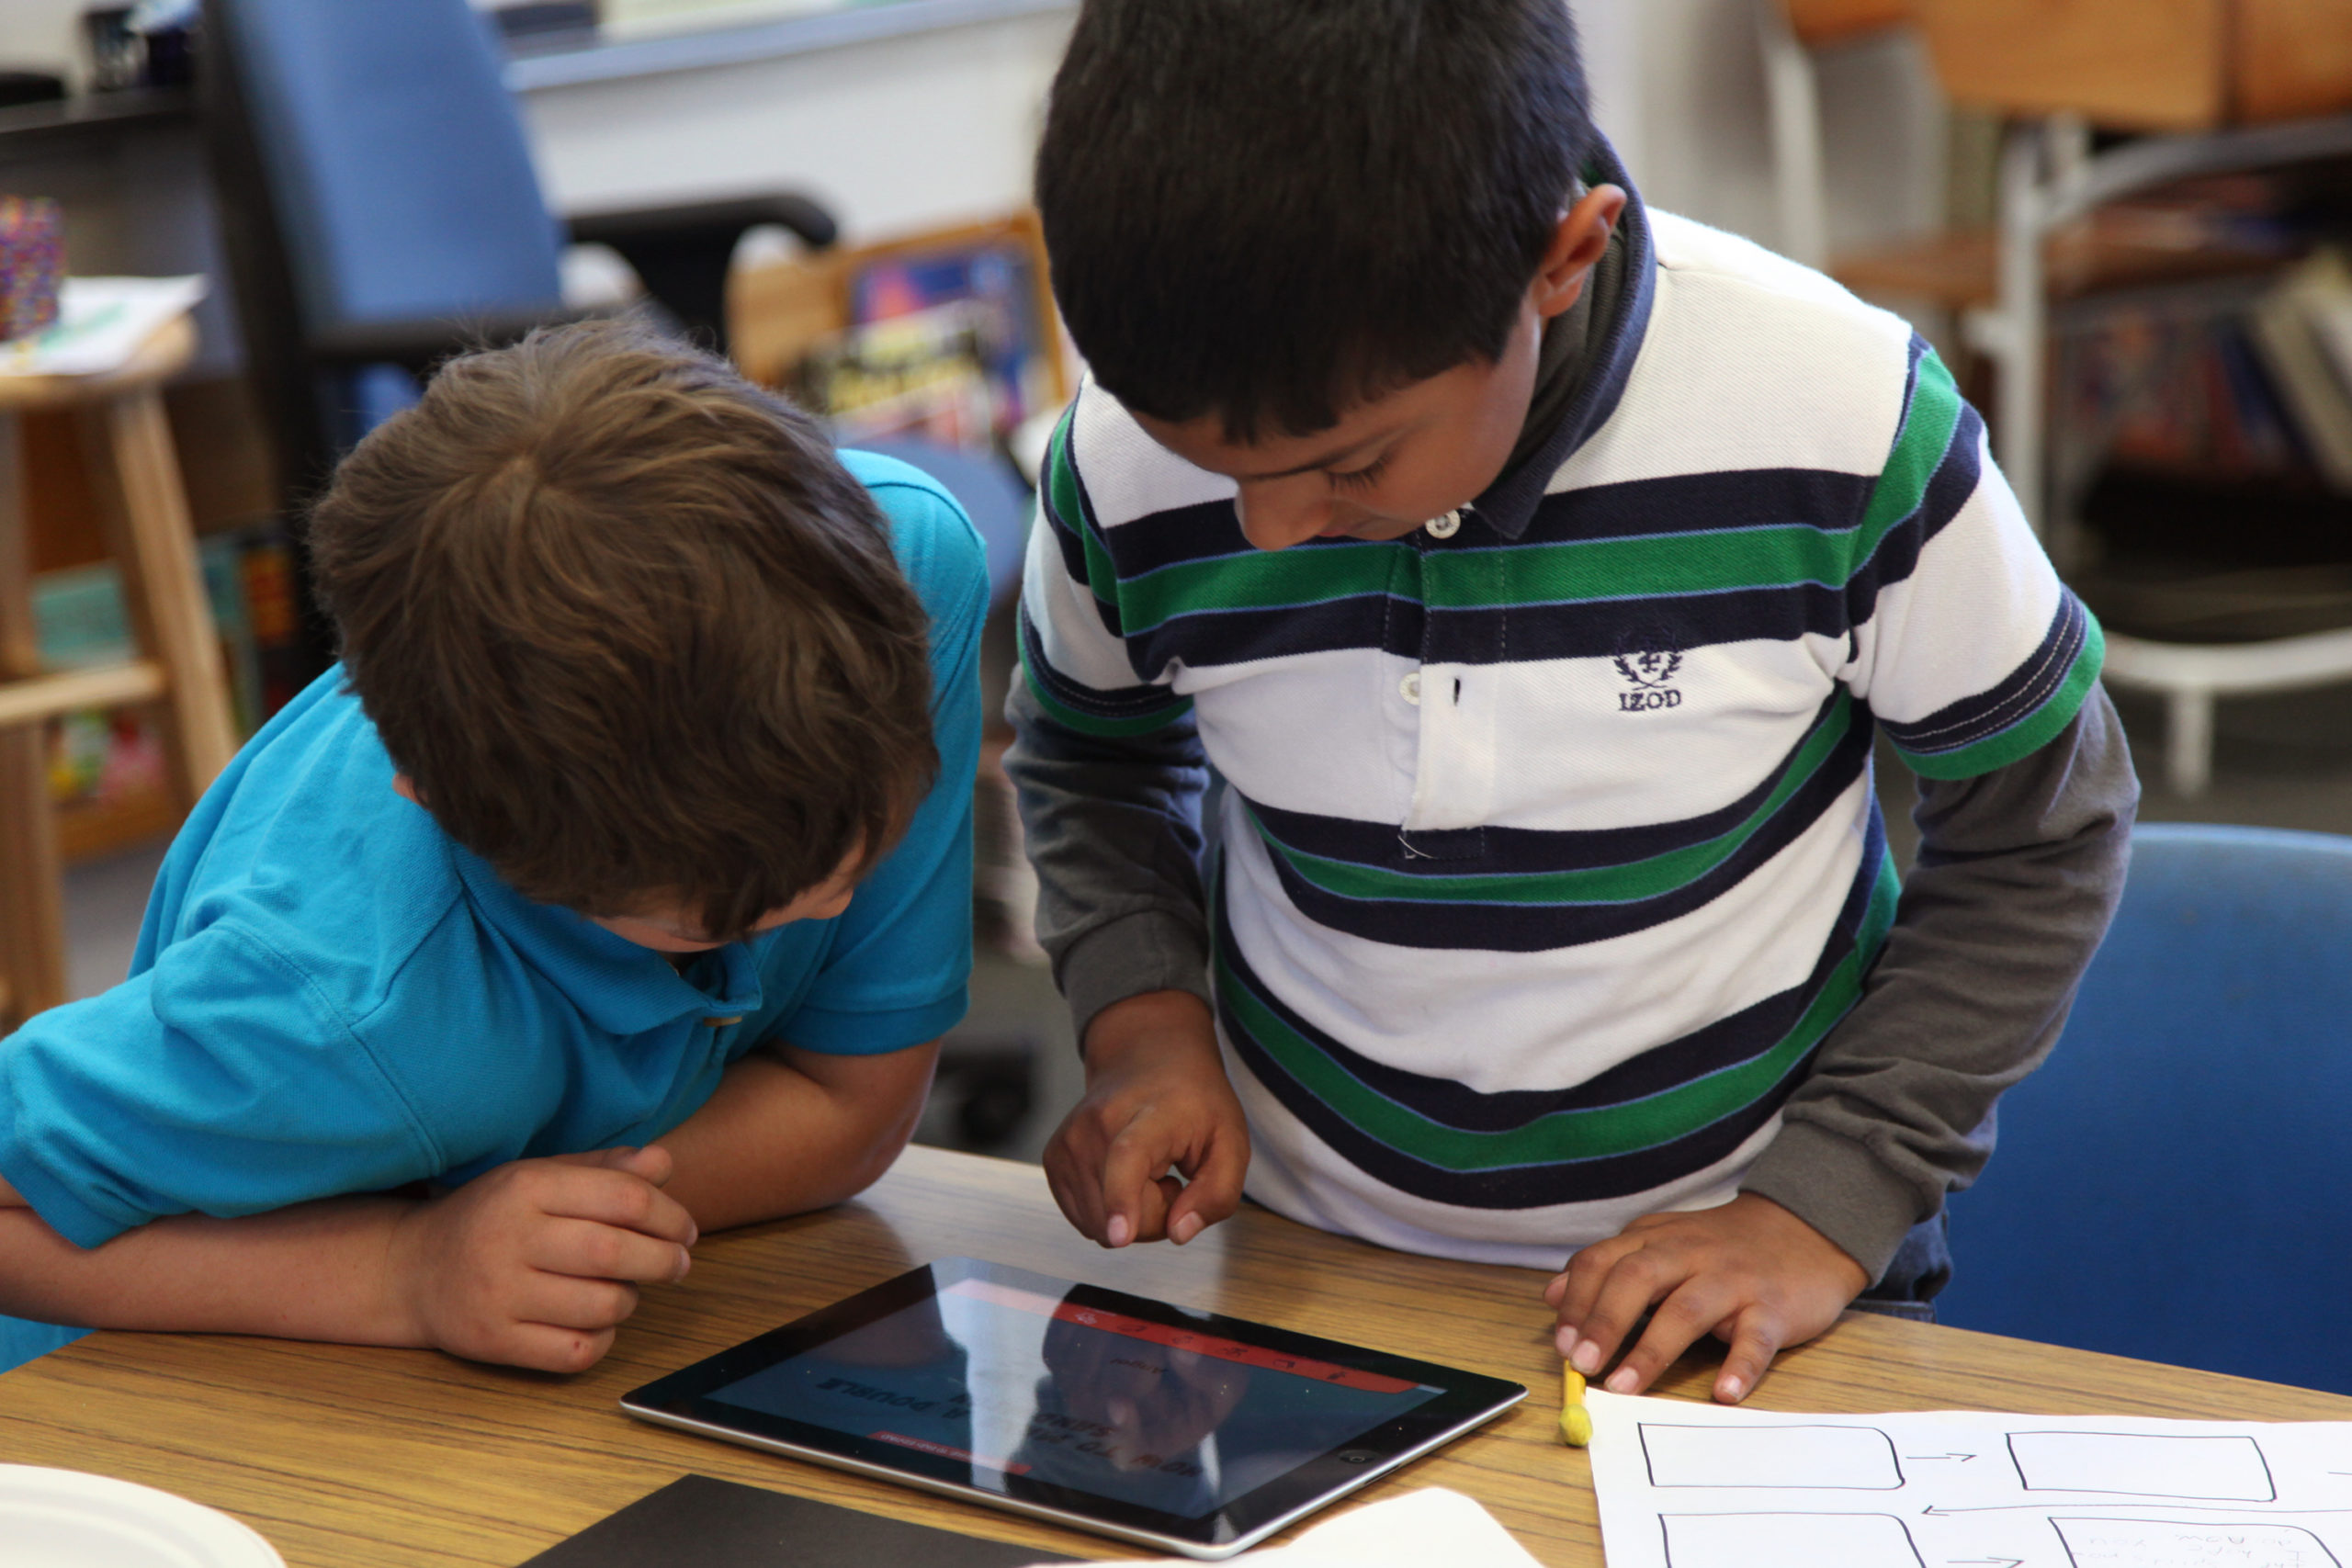 Two students using a tablet in the classroom